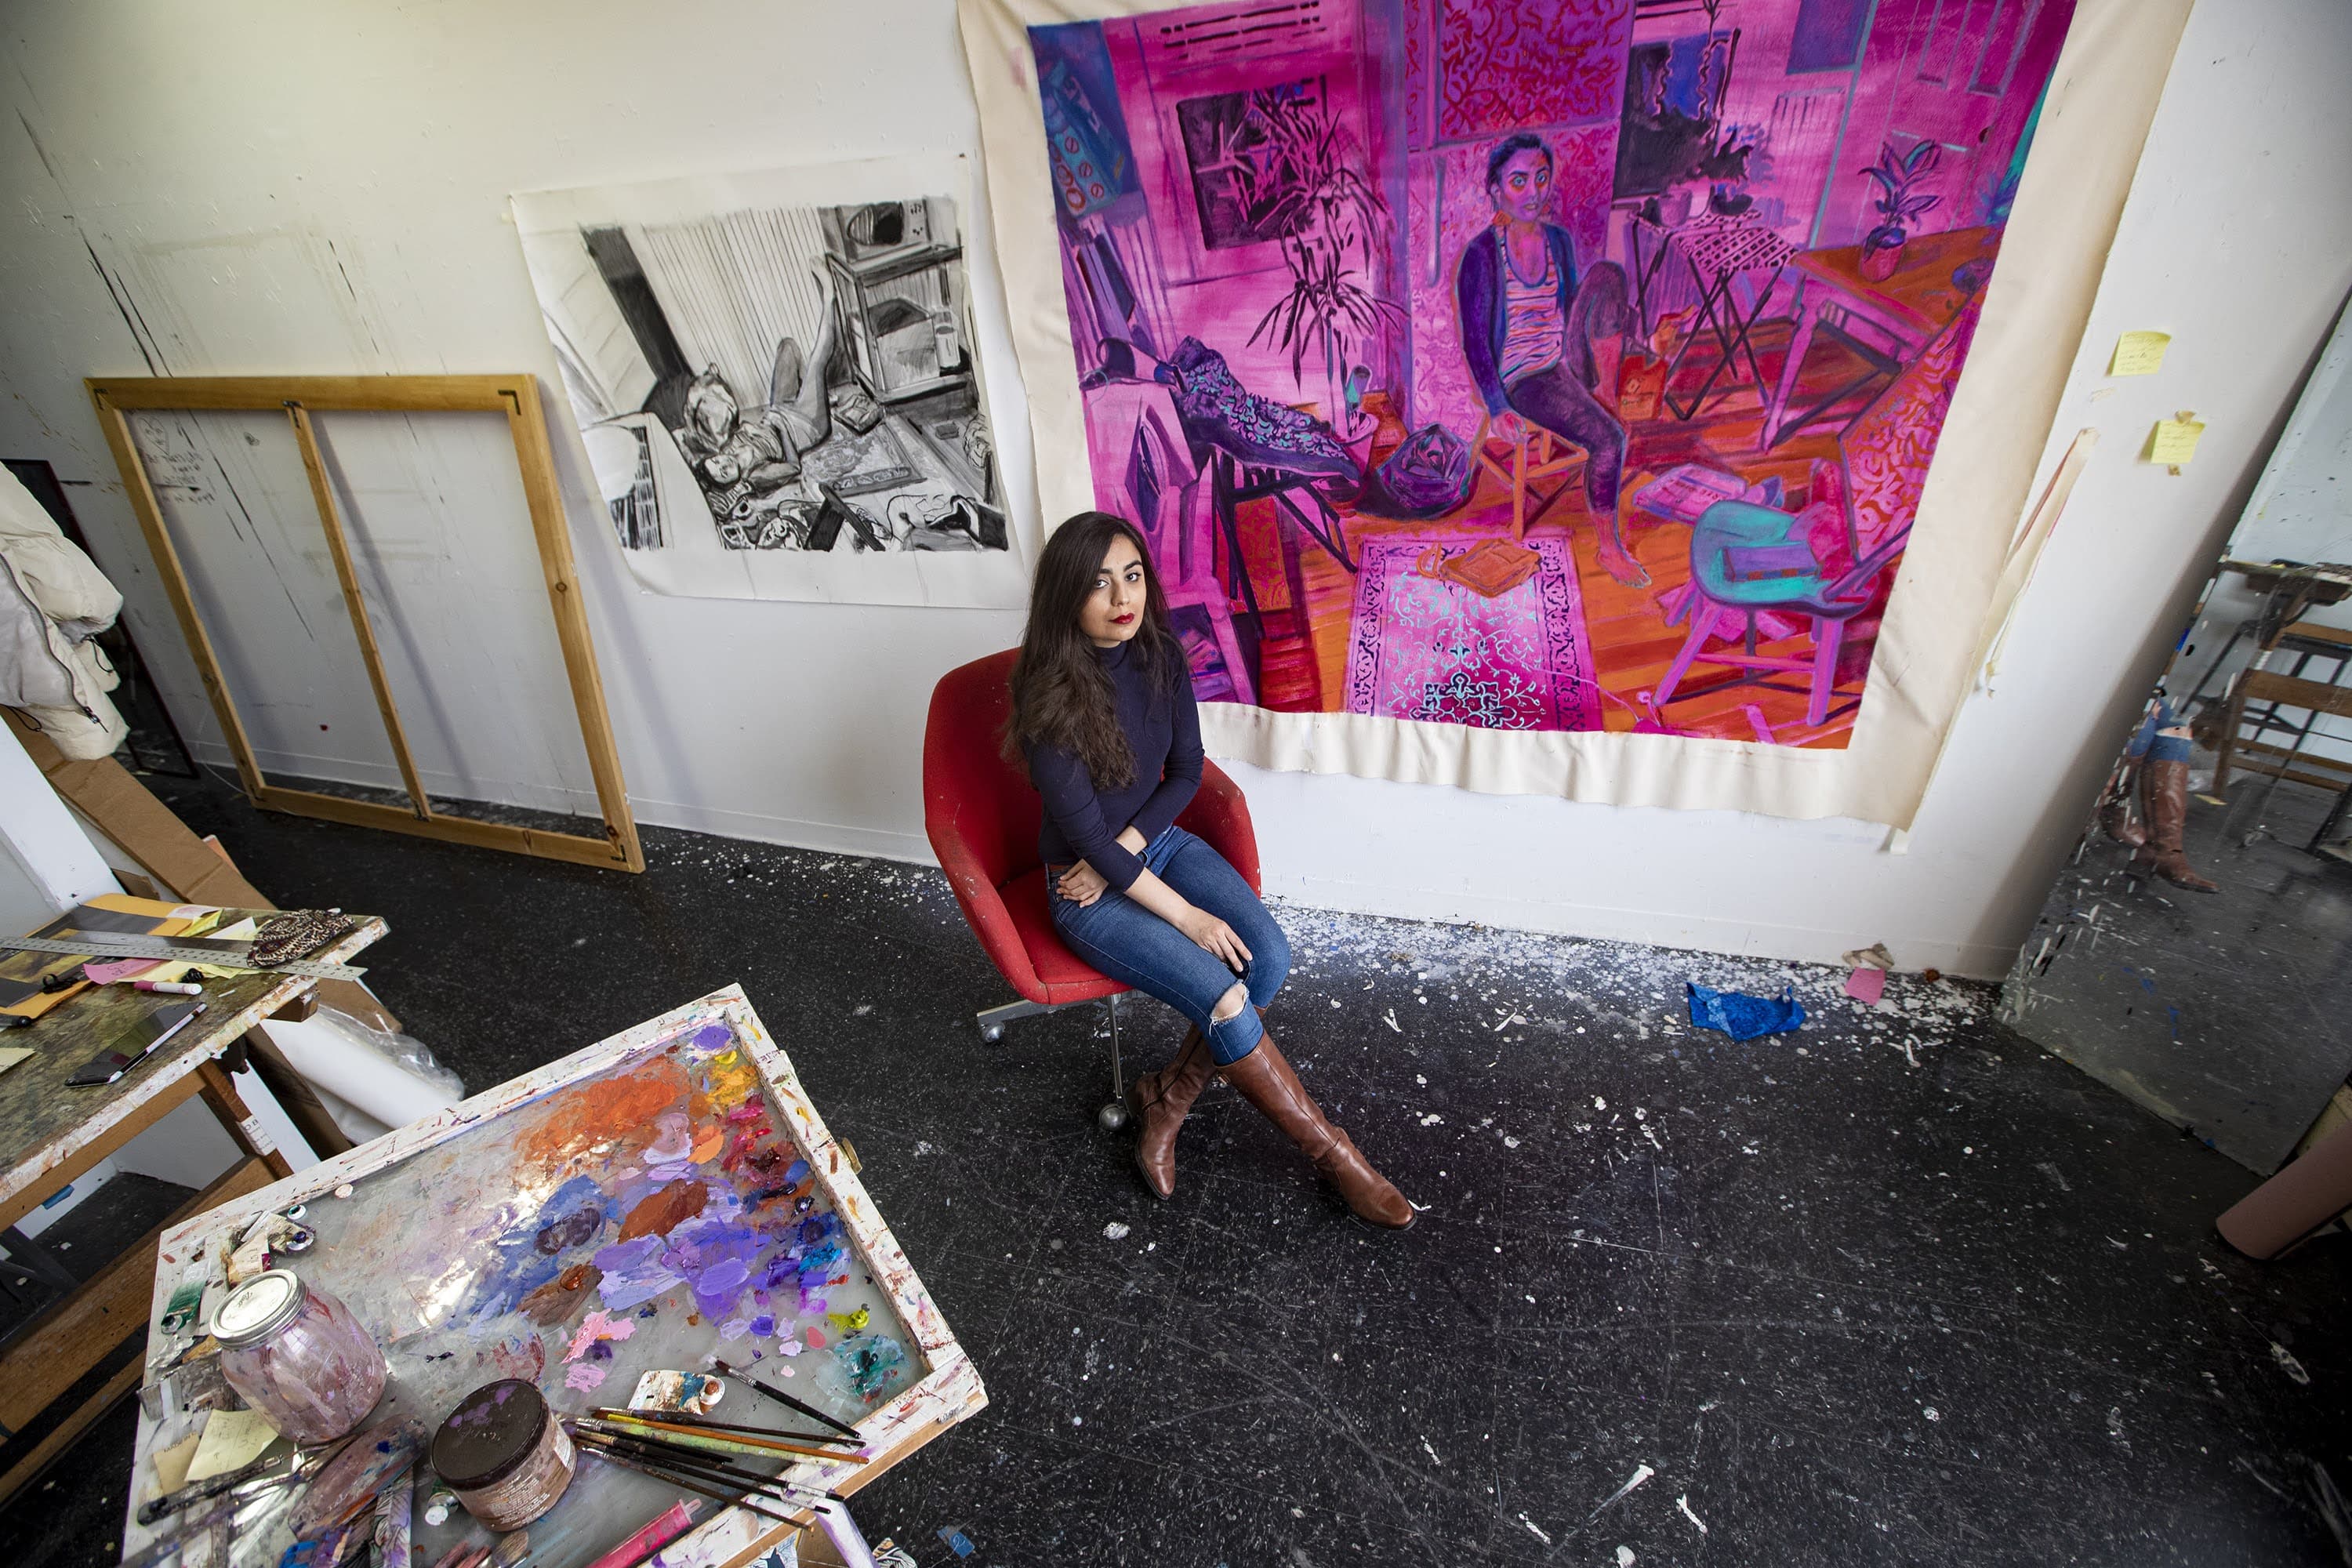 Artist Shabnam Jannesari in front of a painting she is currently working on entitled “62 Sidney Street” at her studio space at the UMass Dartmouth College of Visual and Performing Arts in New Bedford. (Jesse Costa/WBUR)